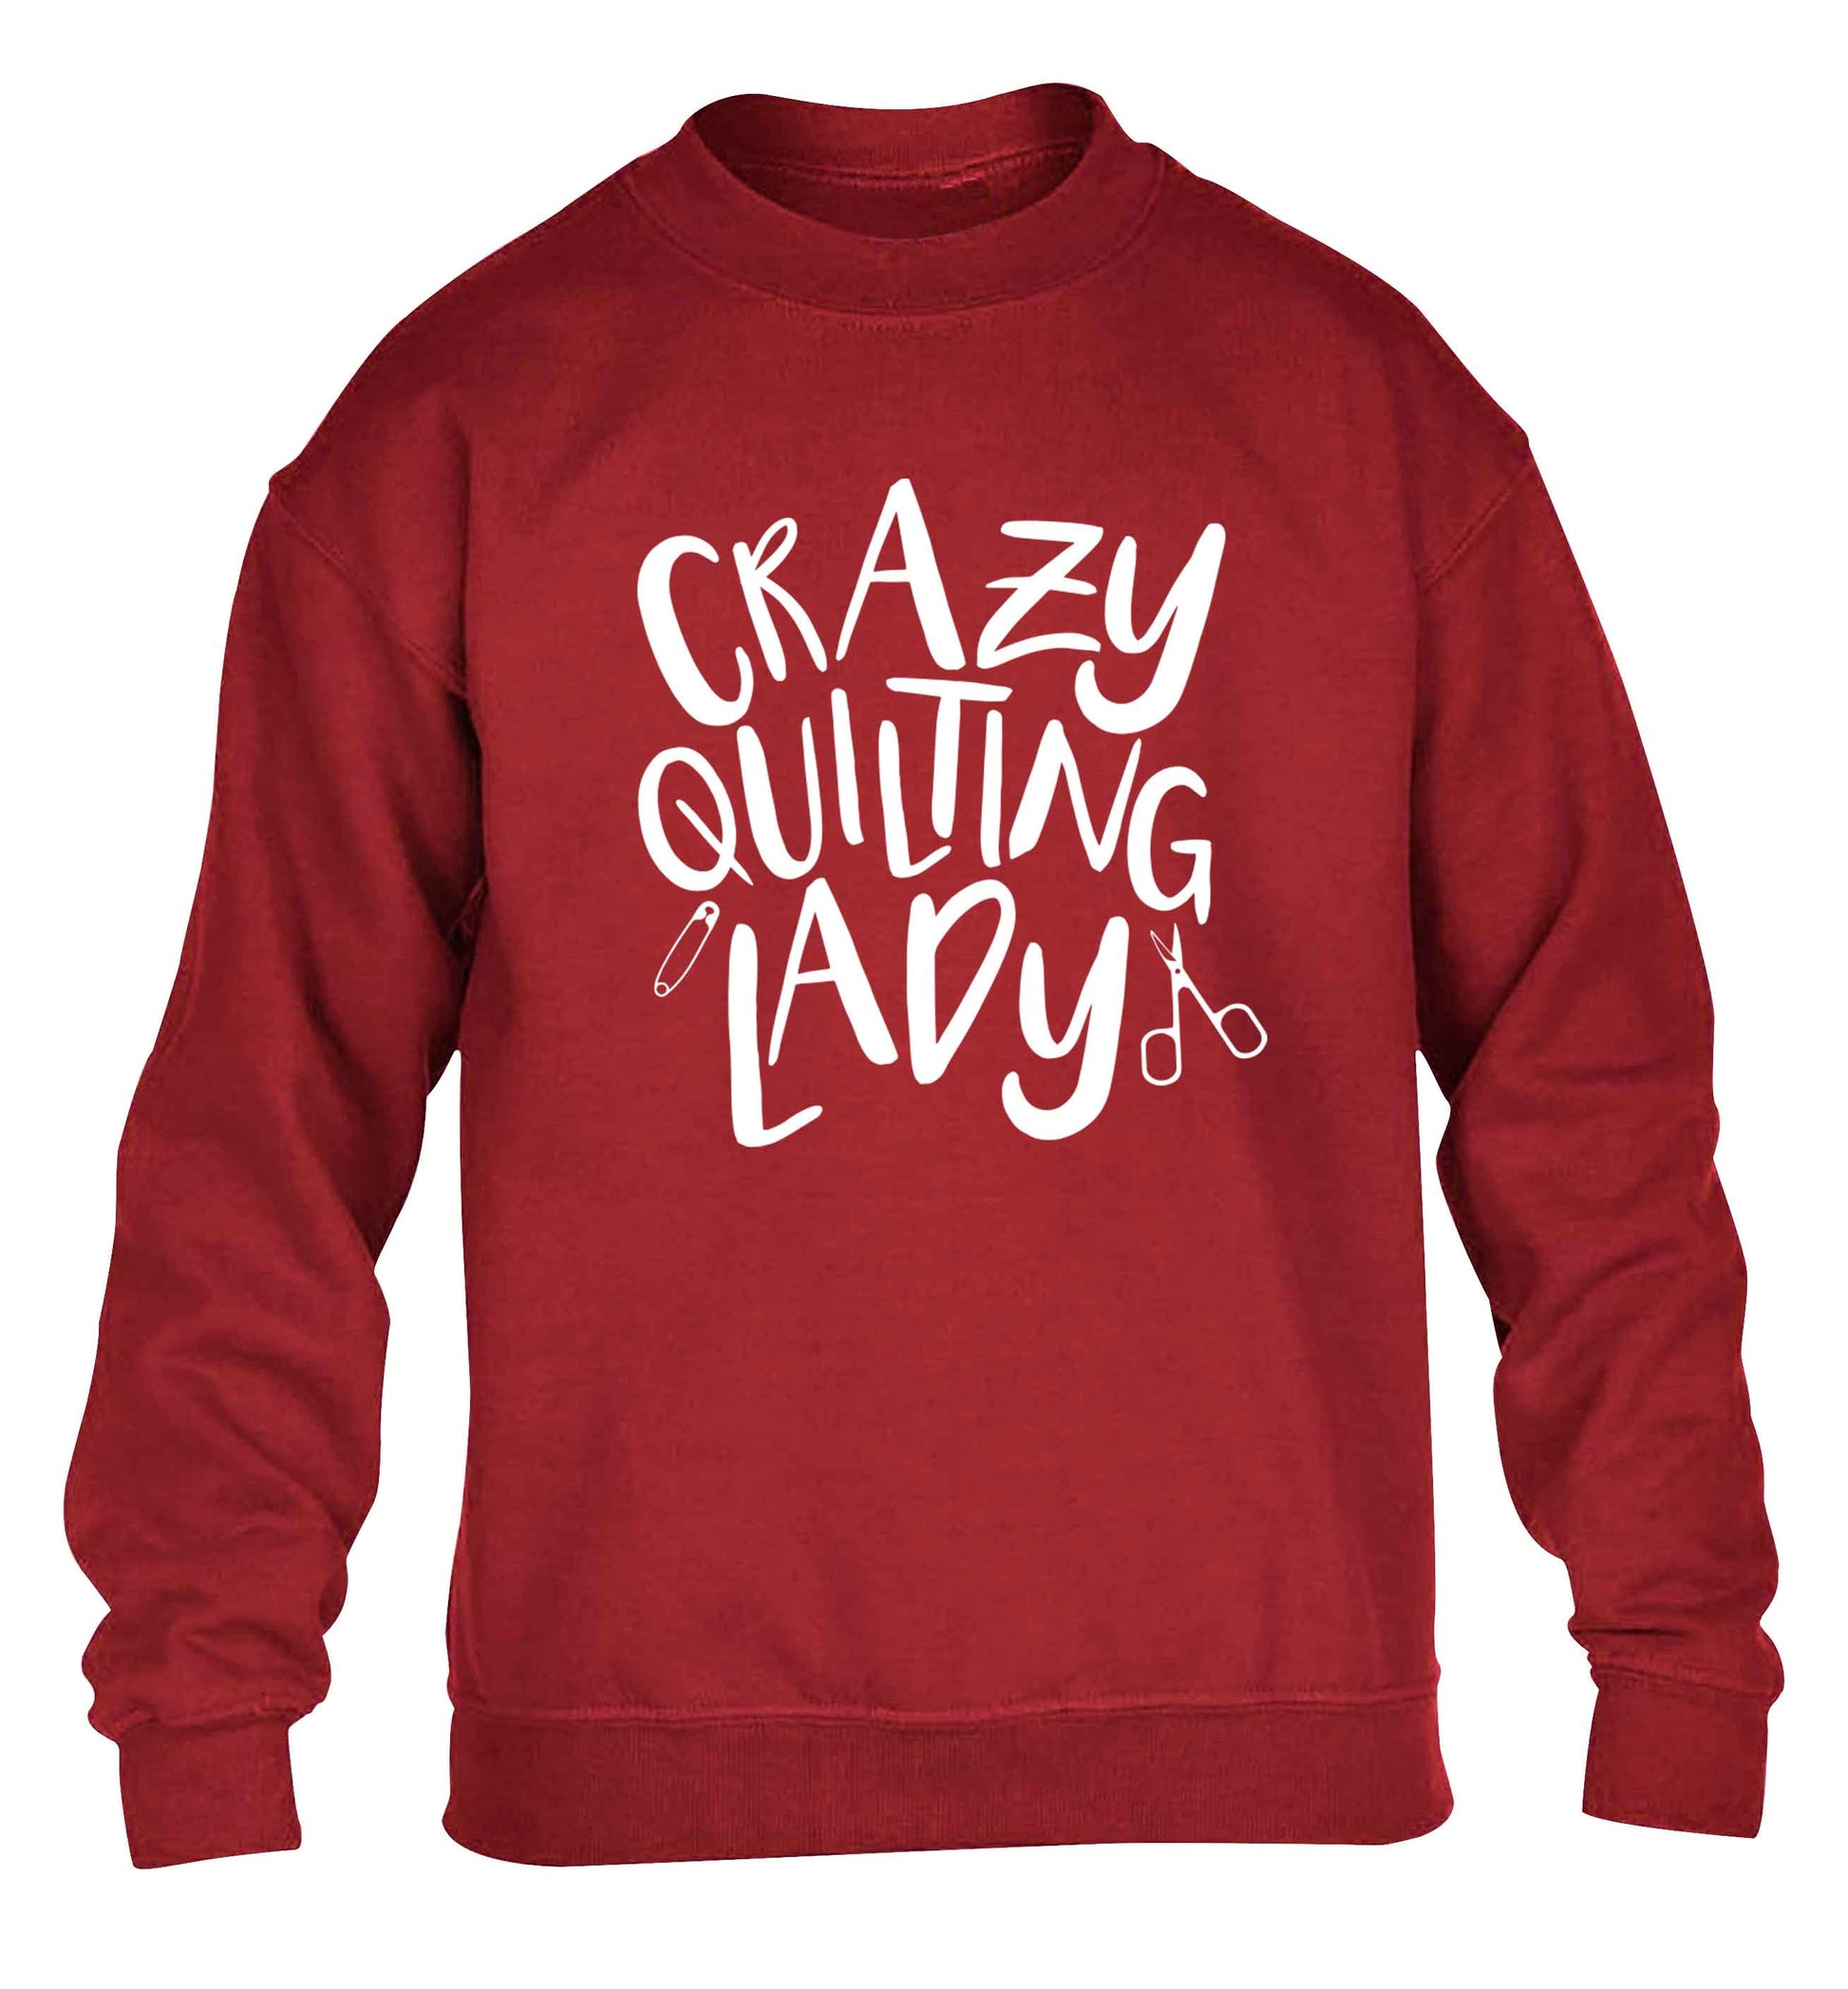 Crazy quilting lady children's grey sweater 12-13 Years